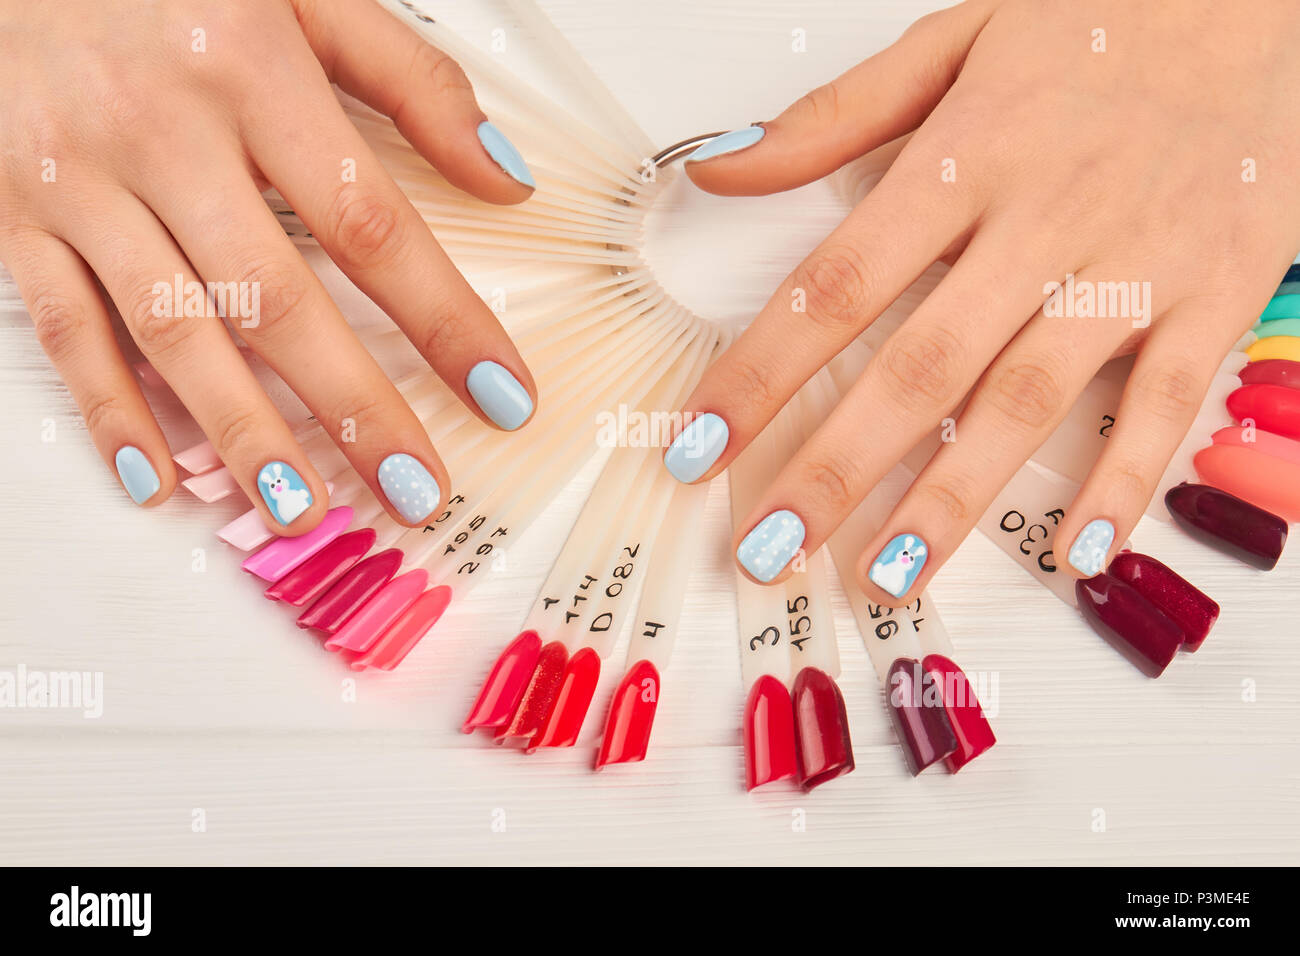 Manicured hands and nails color palette Stock Photo - Alamy